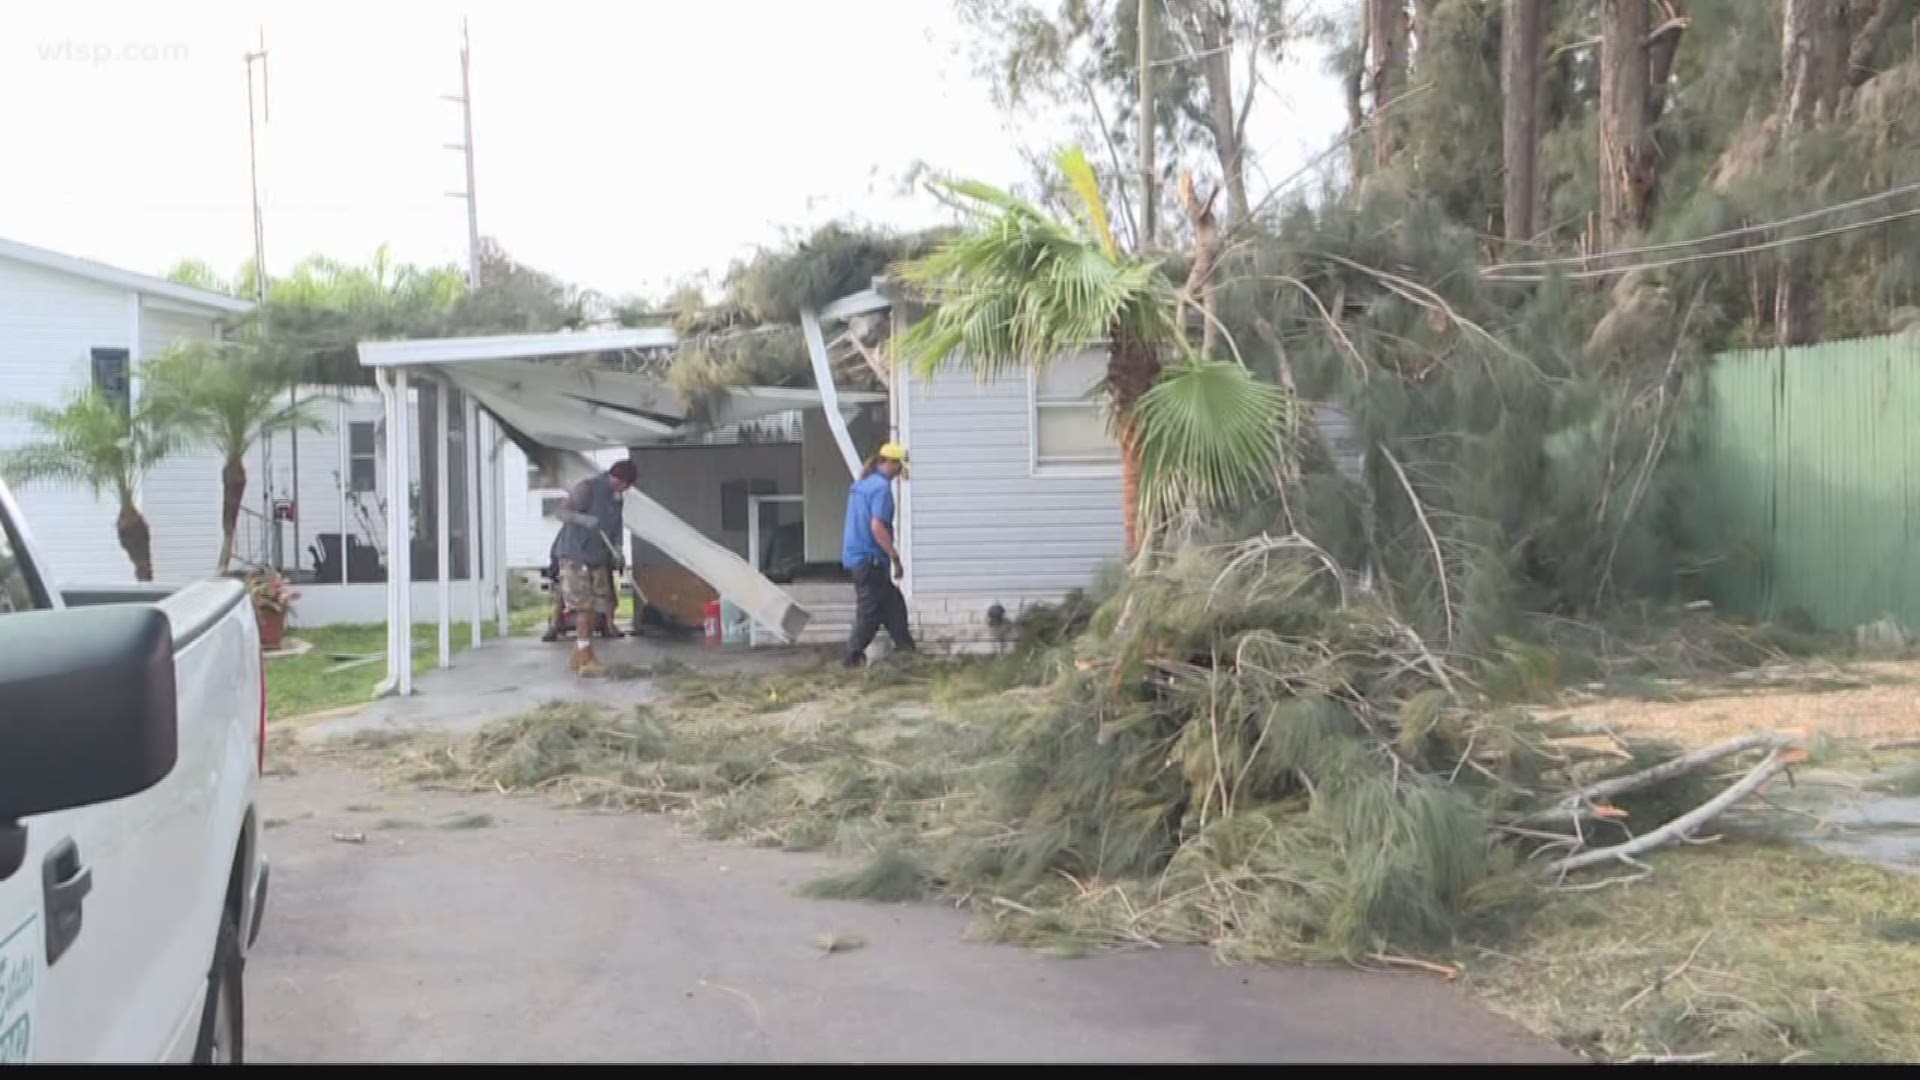 The National Weather Service says winds reached 85 mph.